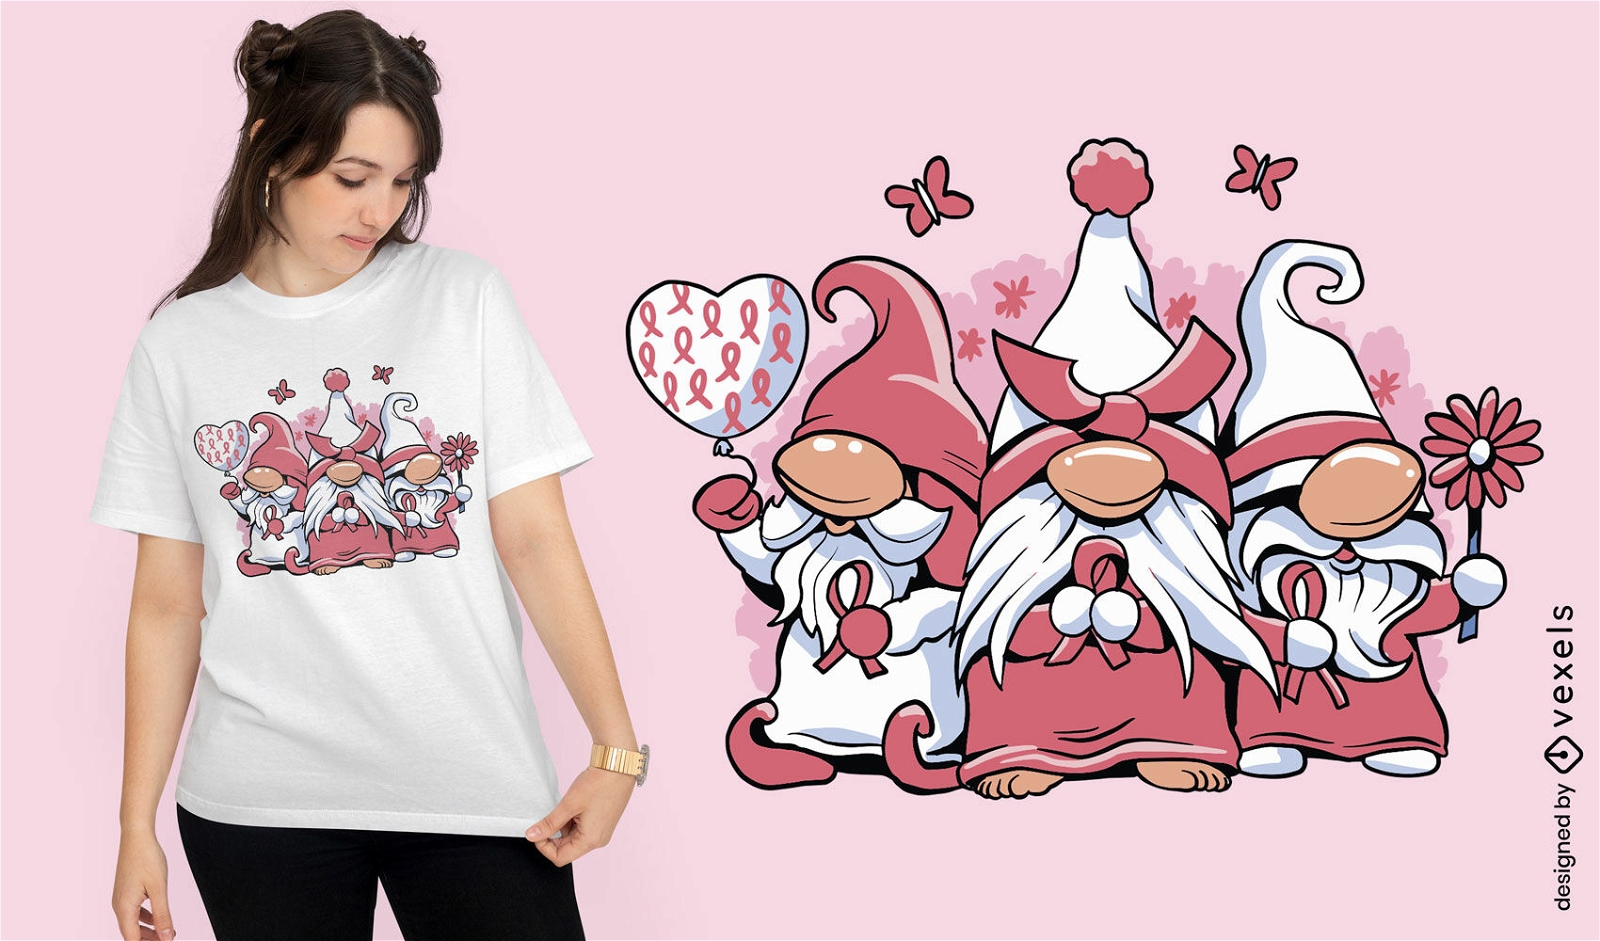 Gnomes with ribbons t-shirt design